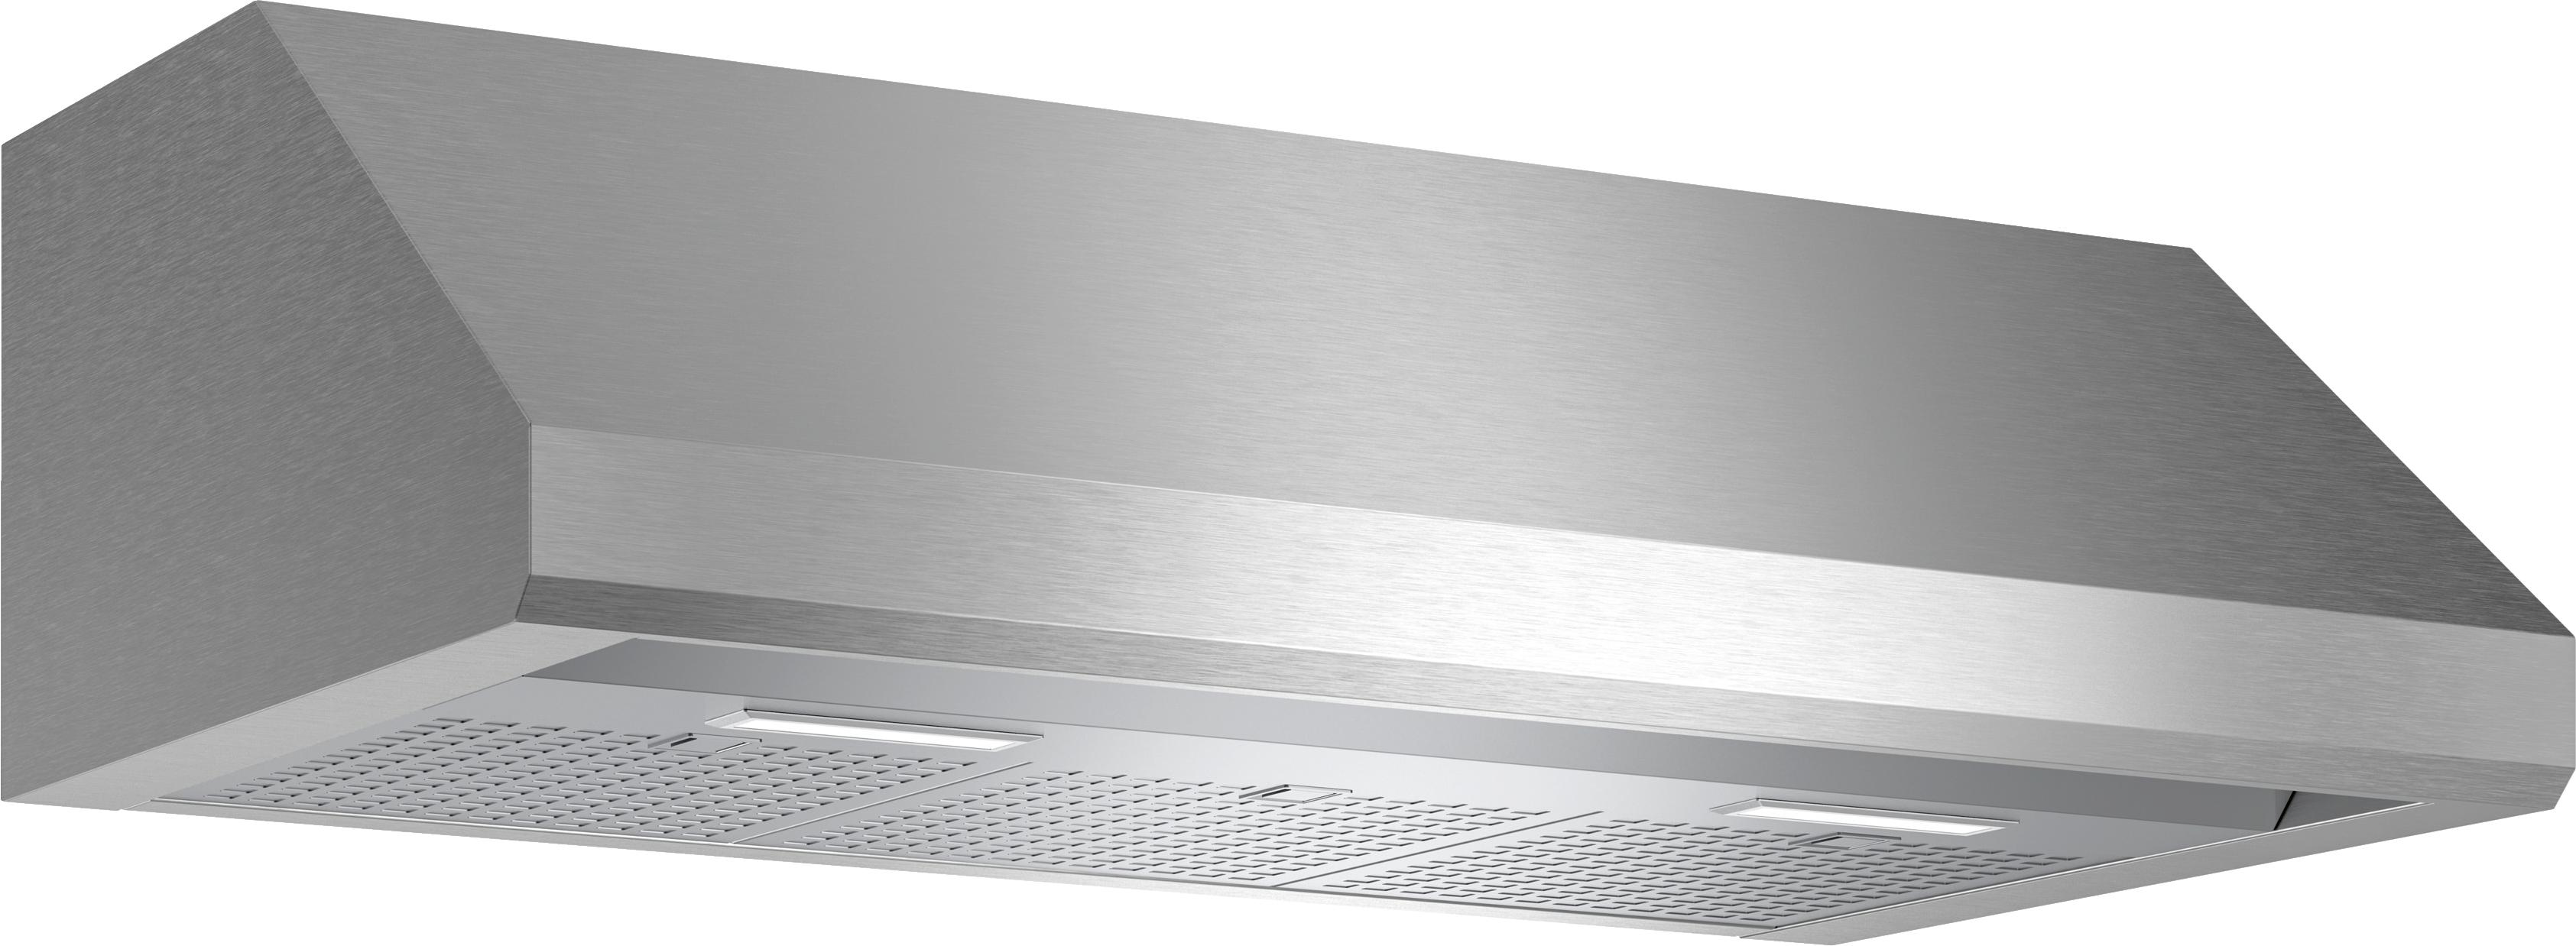 Thermador® Masterpiece® 36" Wall Hood-Stainless Steel-HMWB361WS